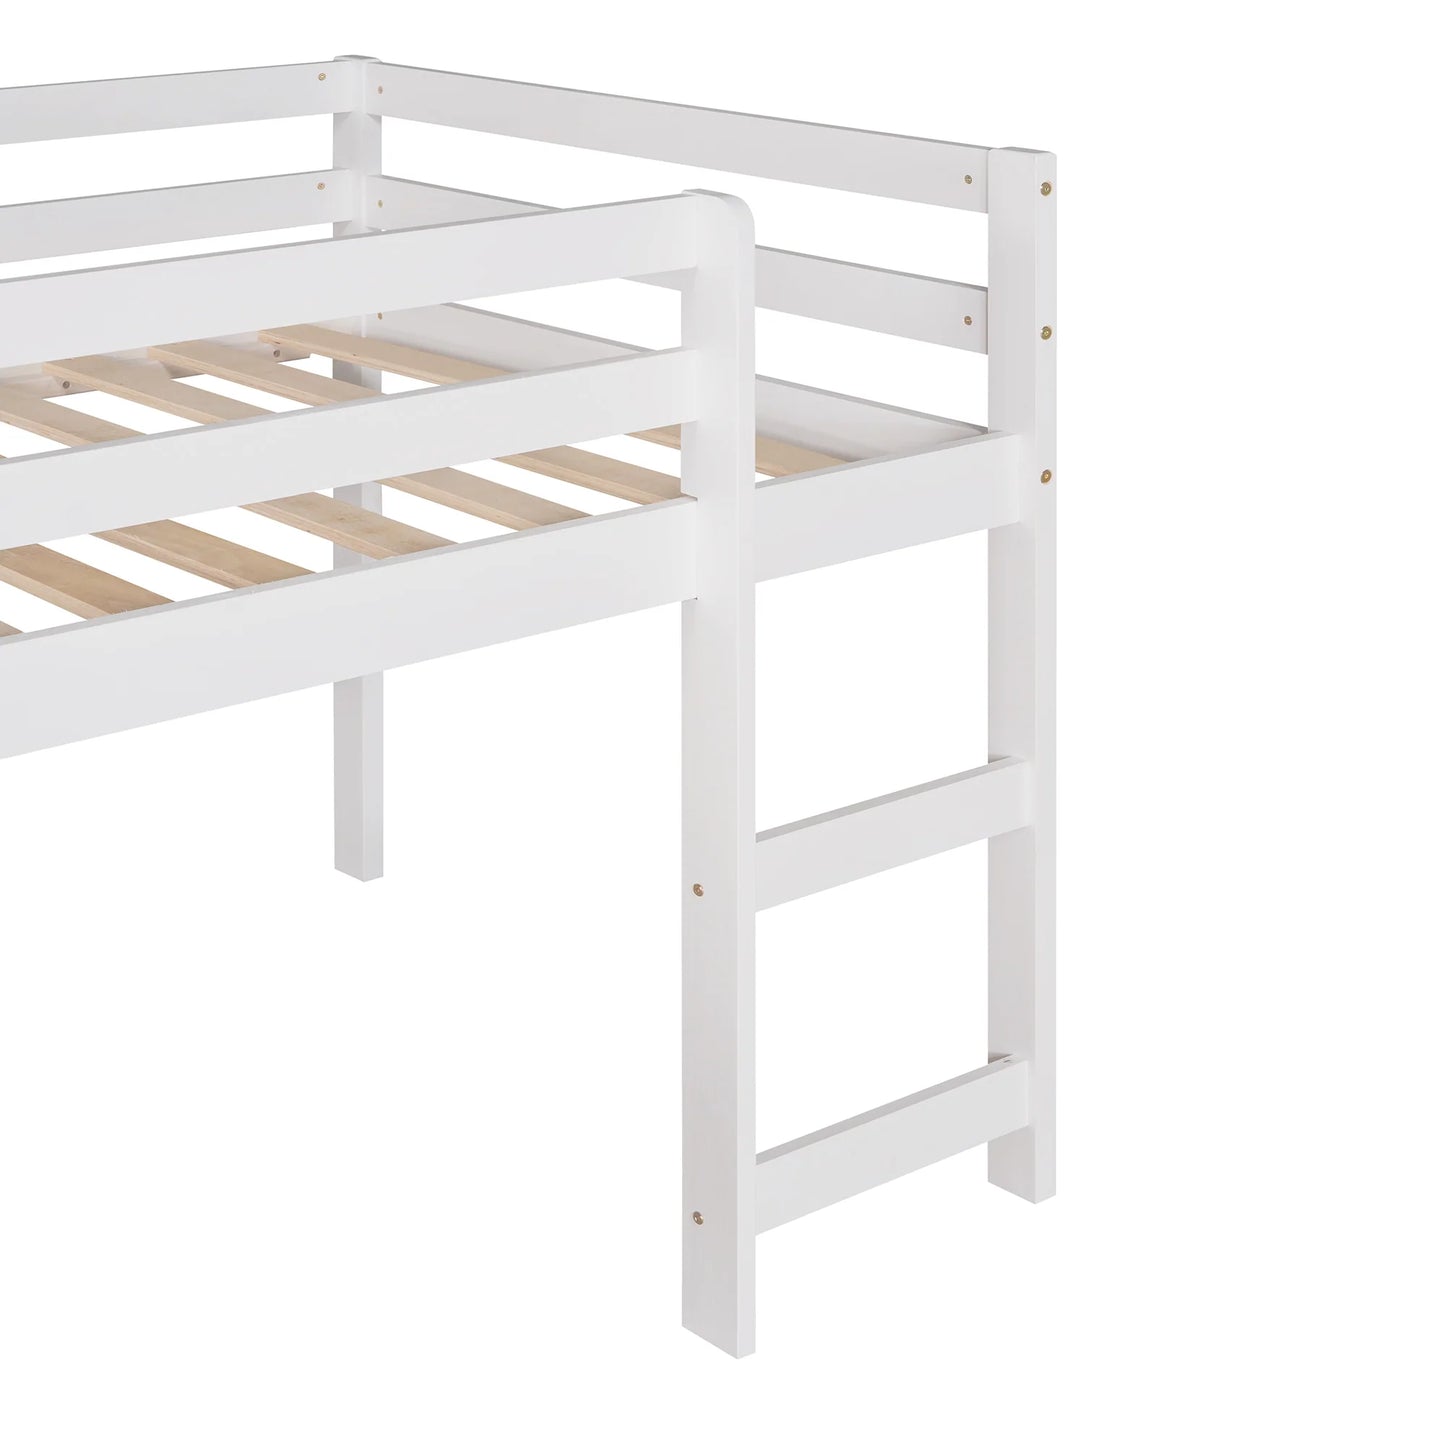 Loft Bed with Slide Multifunctional Design Twin in White